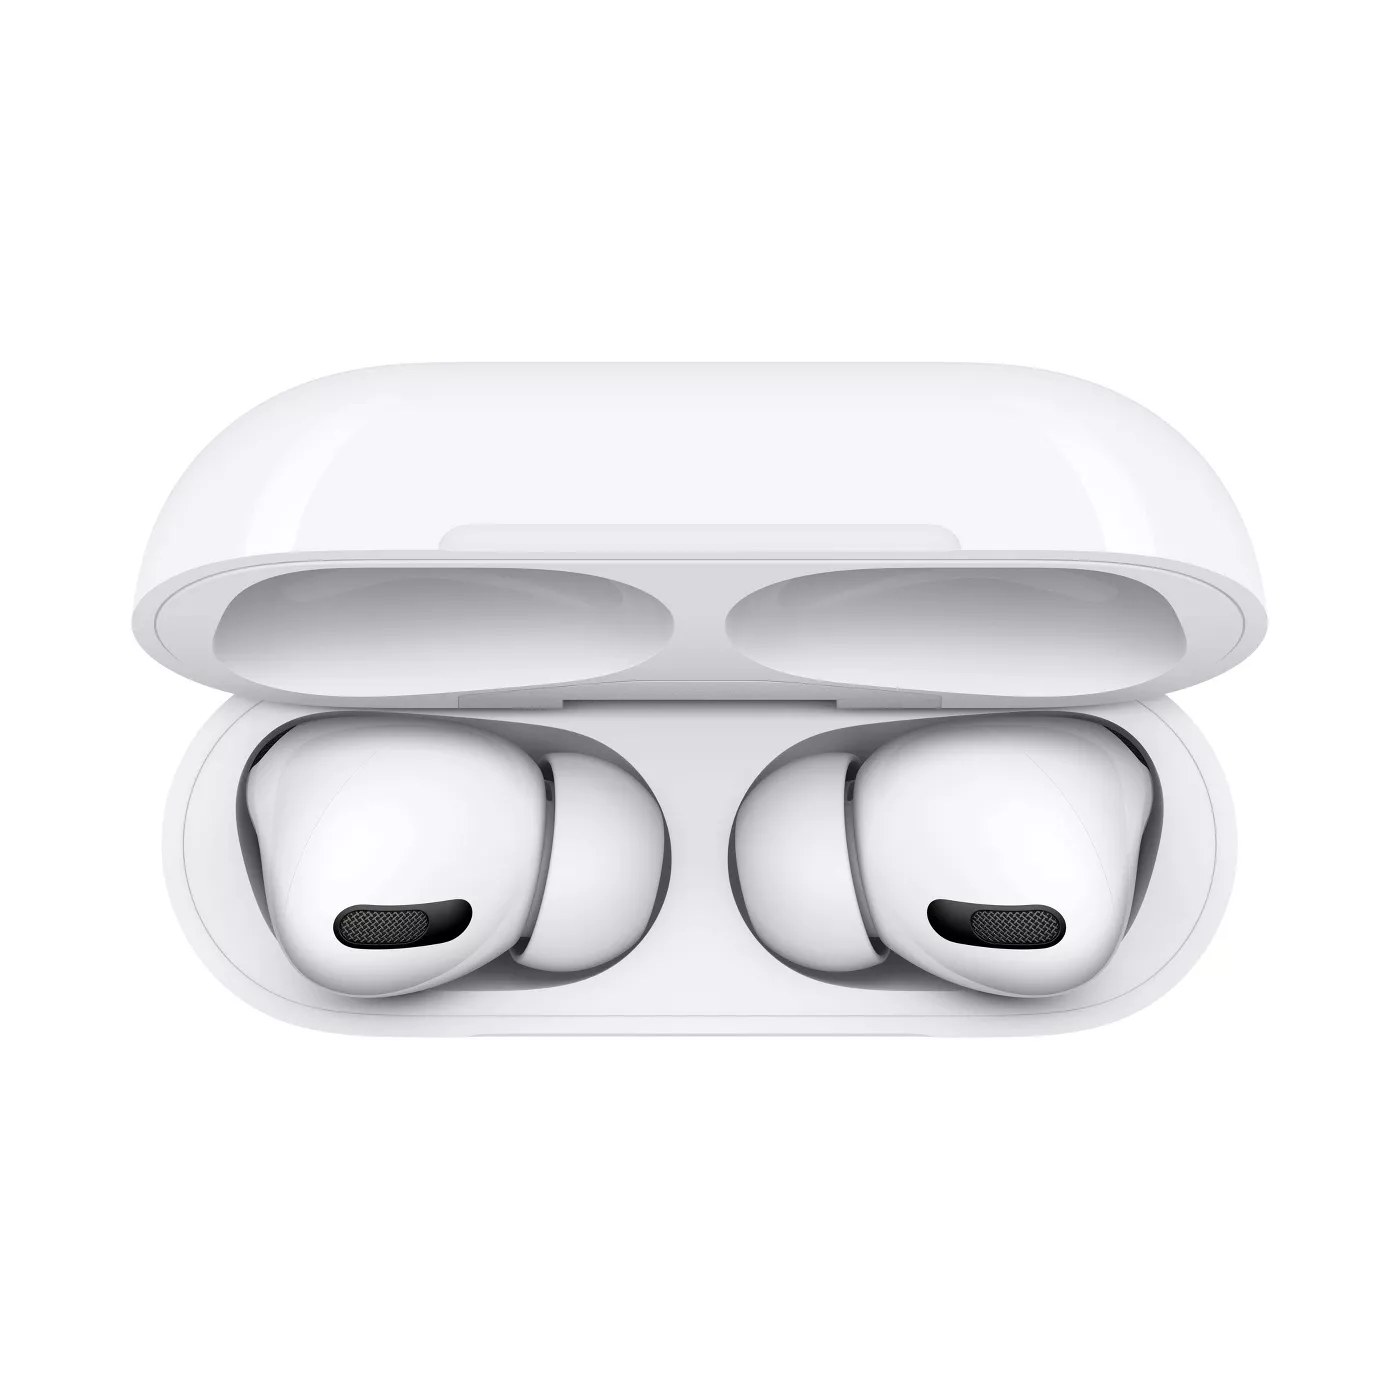 Apple AirPods Pro - image 4 of 9